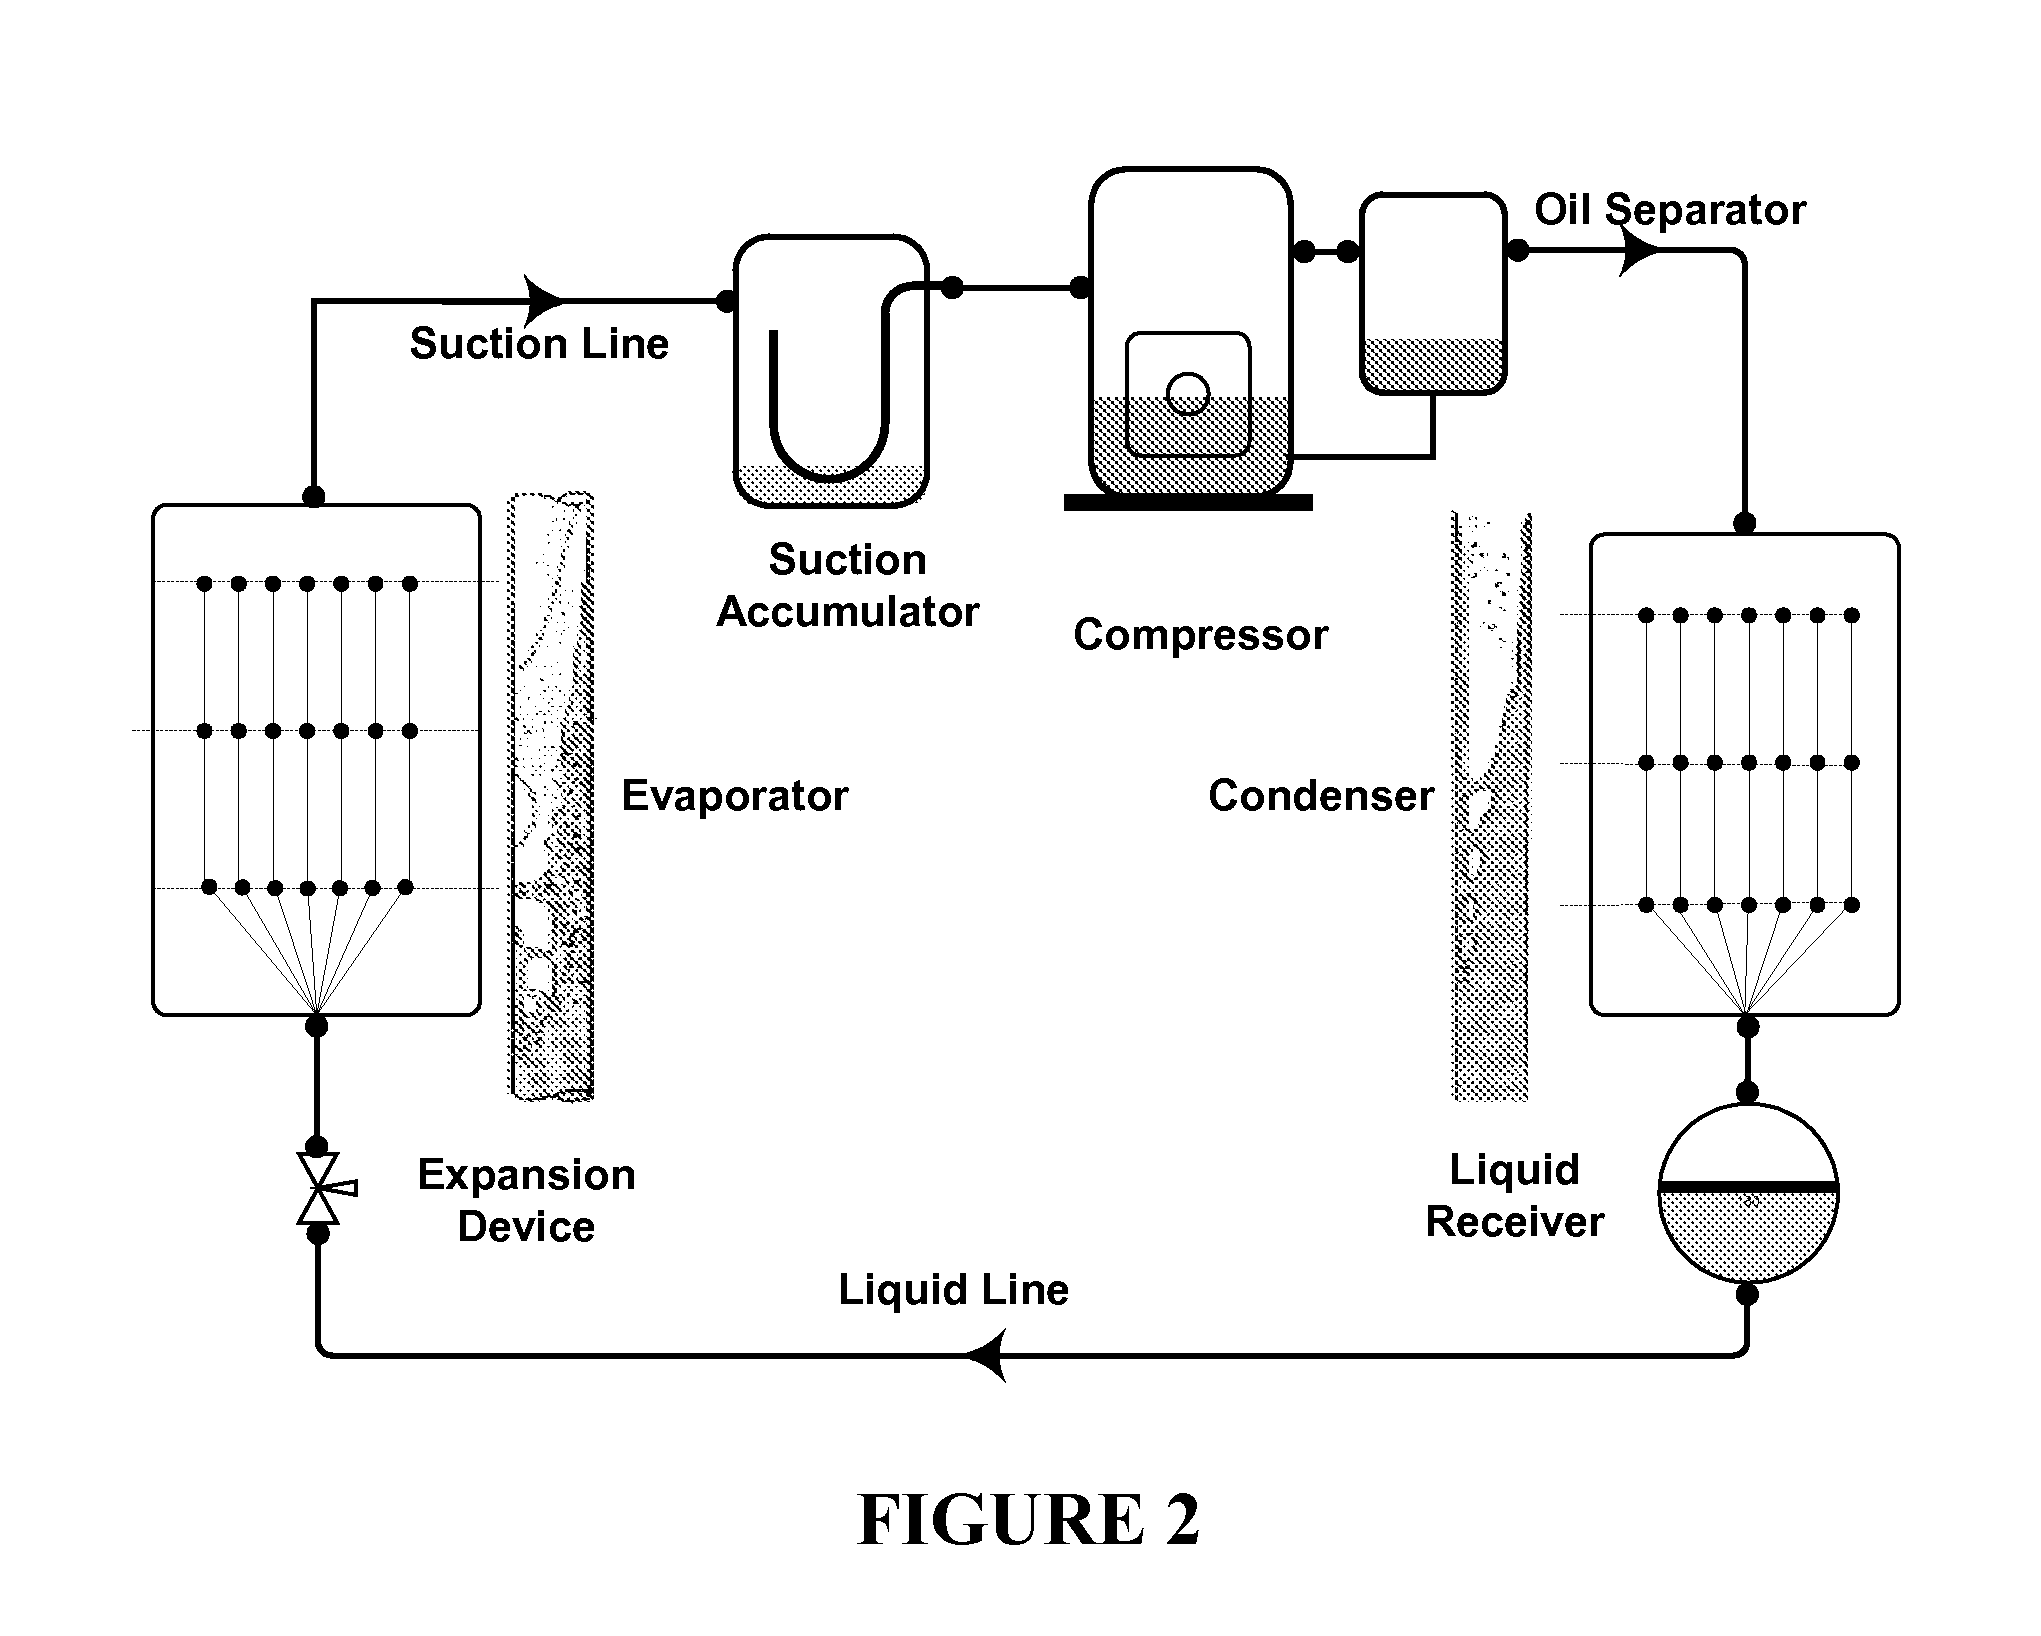 Hydrofluorocarbon/trifluoroiodomethane/ hydrocarbons refrigerant compositions